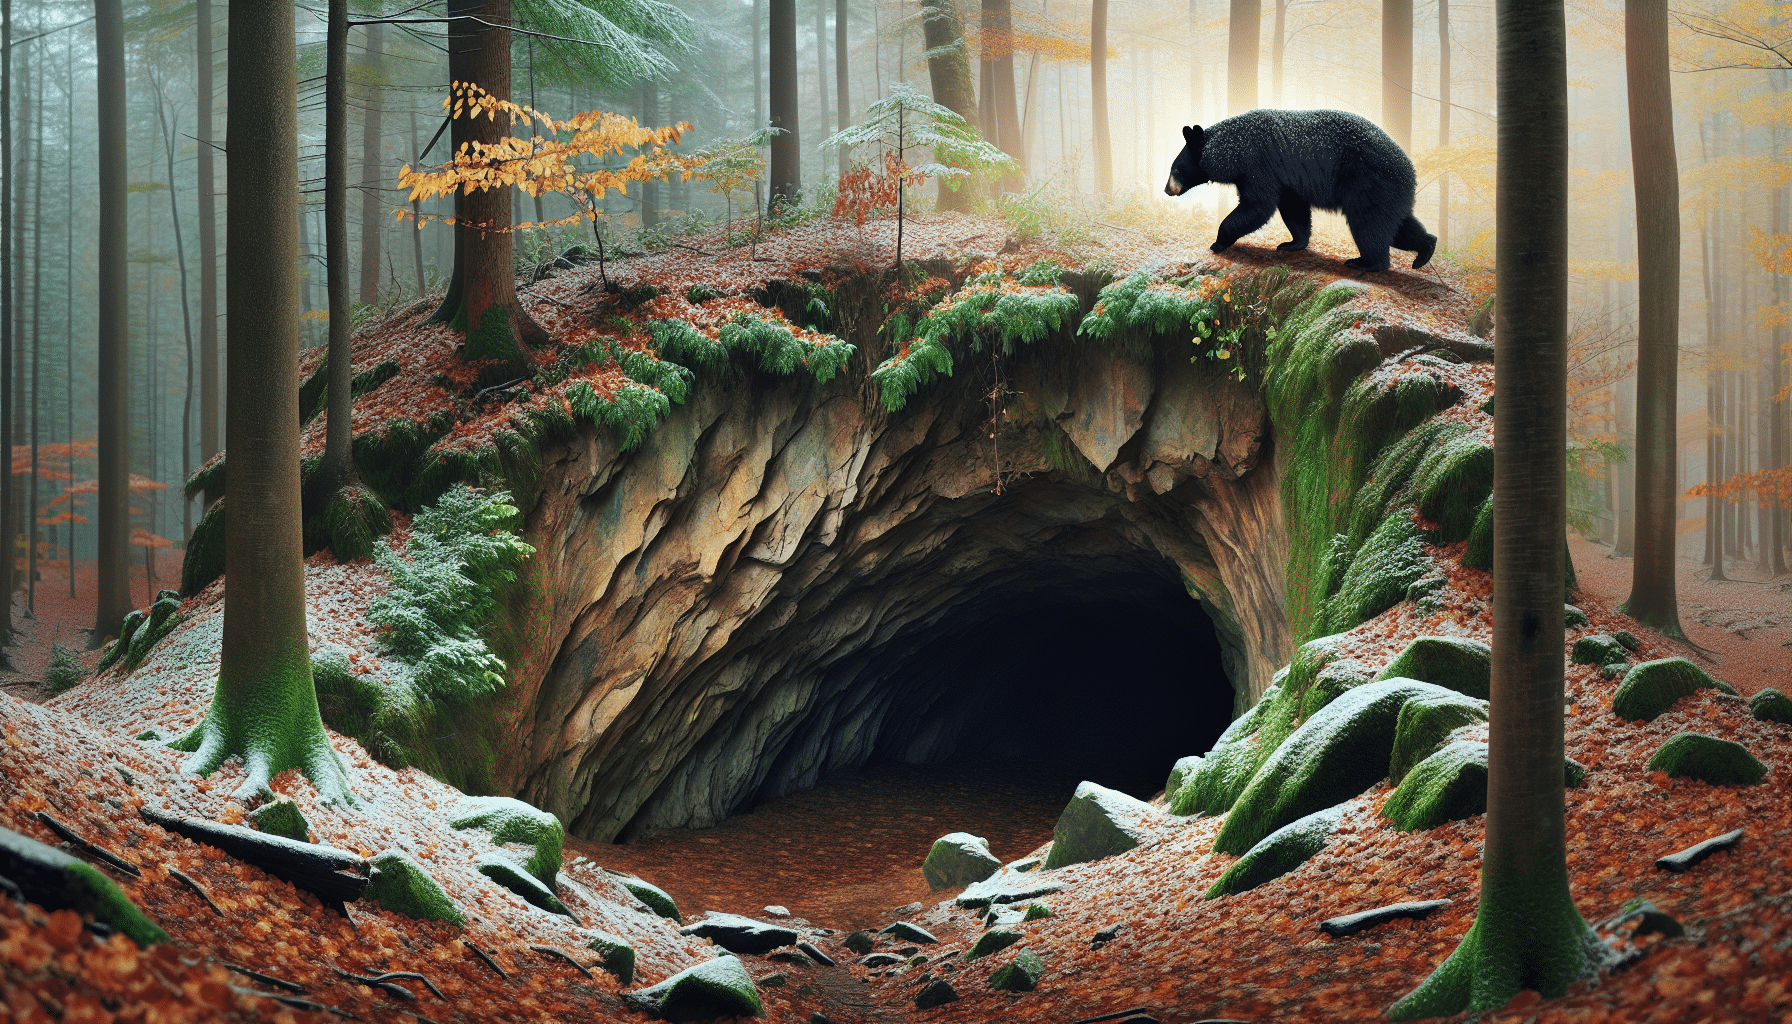 An image showcasing the hibernation process of black bears. Picture a serene forest environment with a black bear entering a large, concealed cave signifying the onset of its winter hibernation. The cave is inconspicuous, naturally formed among the dense forest terrain. Please represent autumn transitioning into winter, with leaves changing colors and snow lightly dusting the forest ground. The black bear is the focal point, carefully maneuvering the terrain towards the cave. Ensure the image is void of any people, text, brands, or logos.